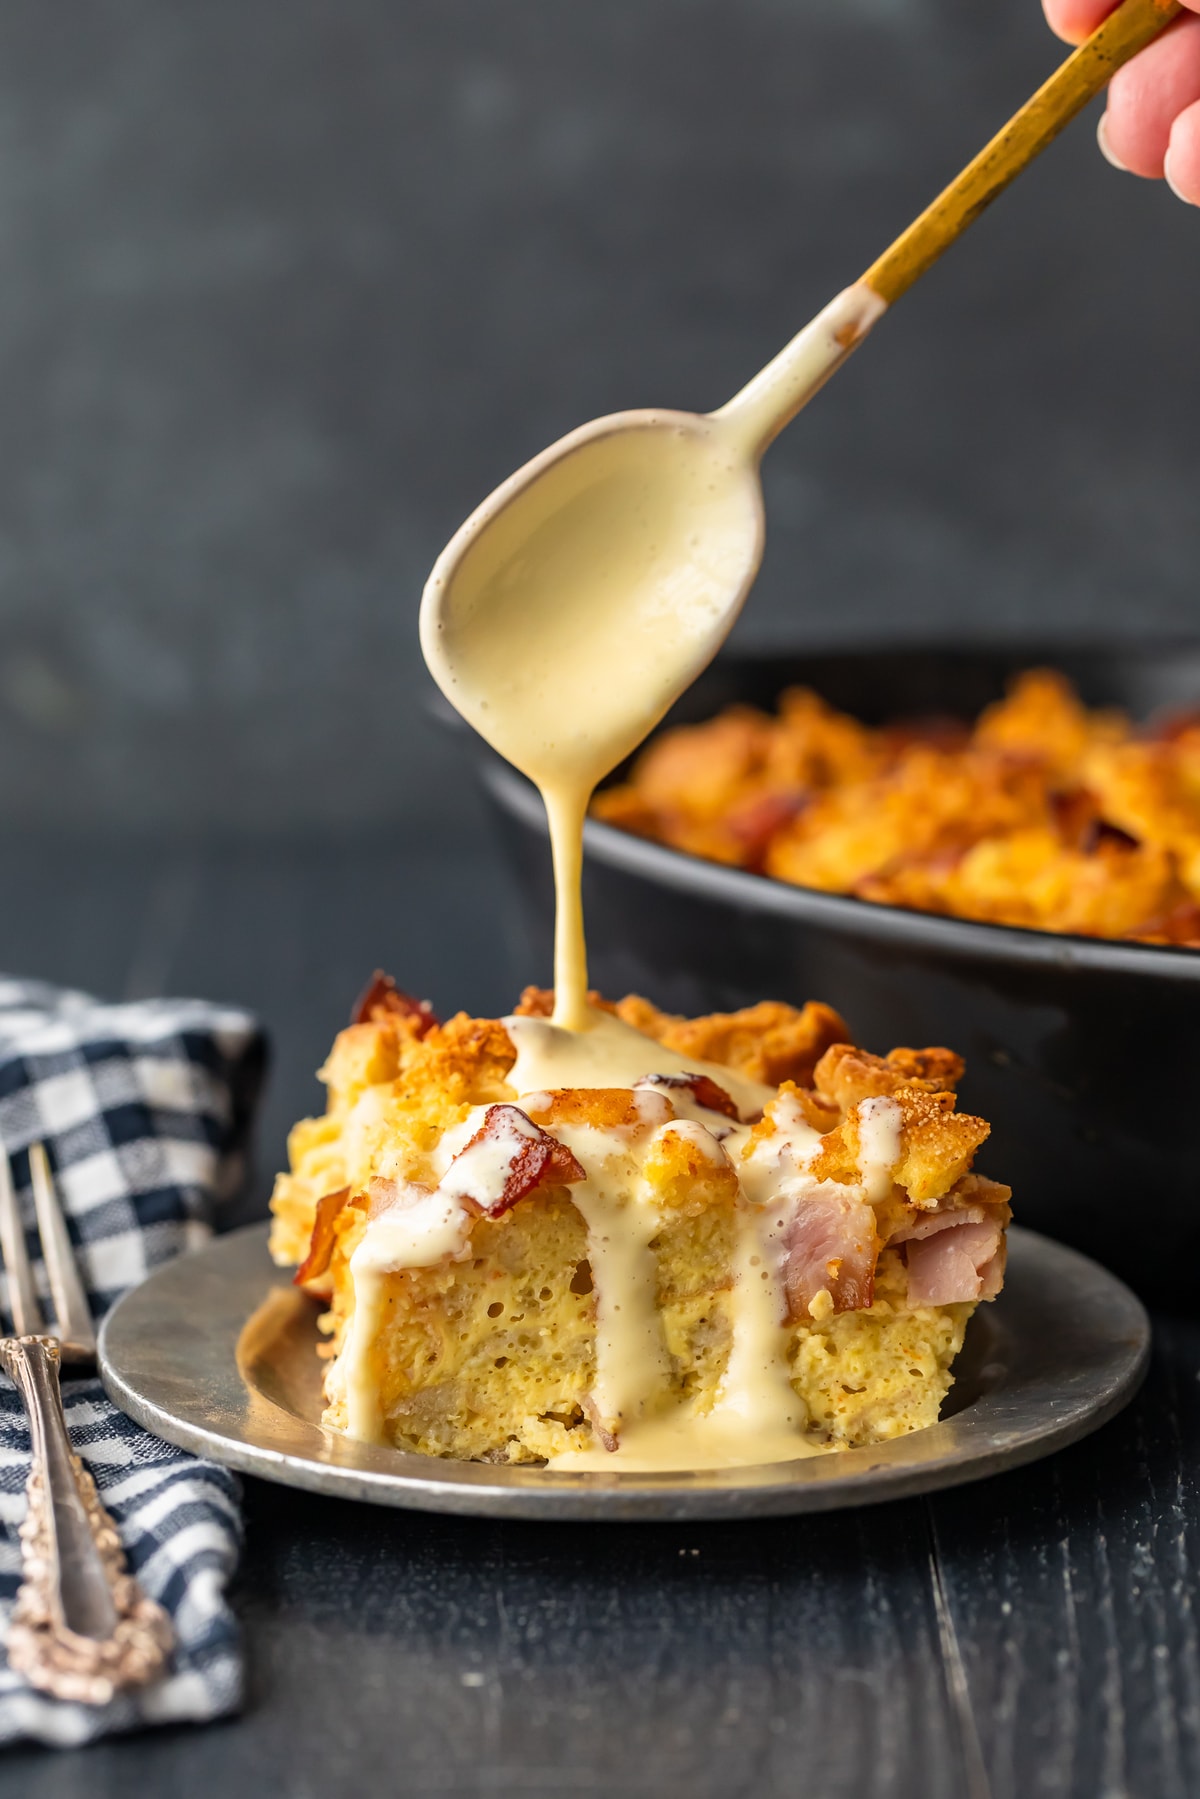 eggs benedict casserole topped with hollandaise sauce